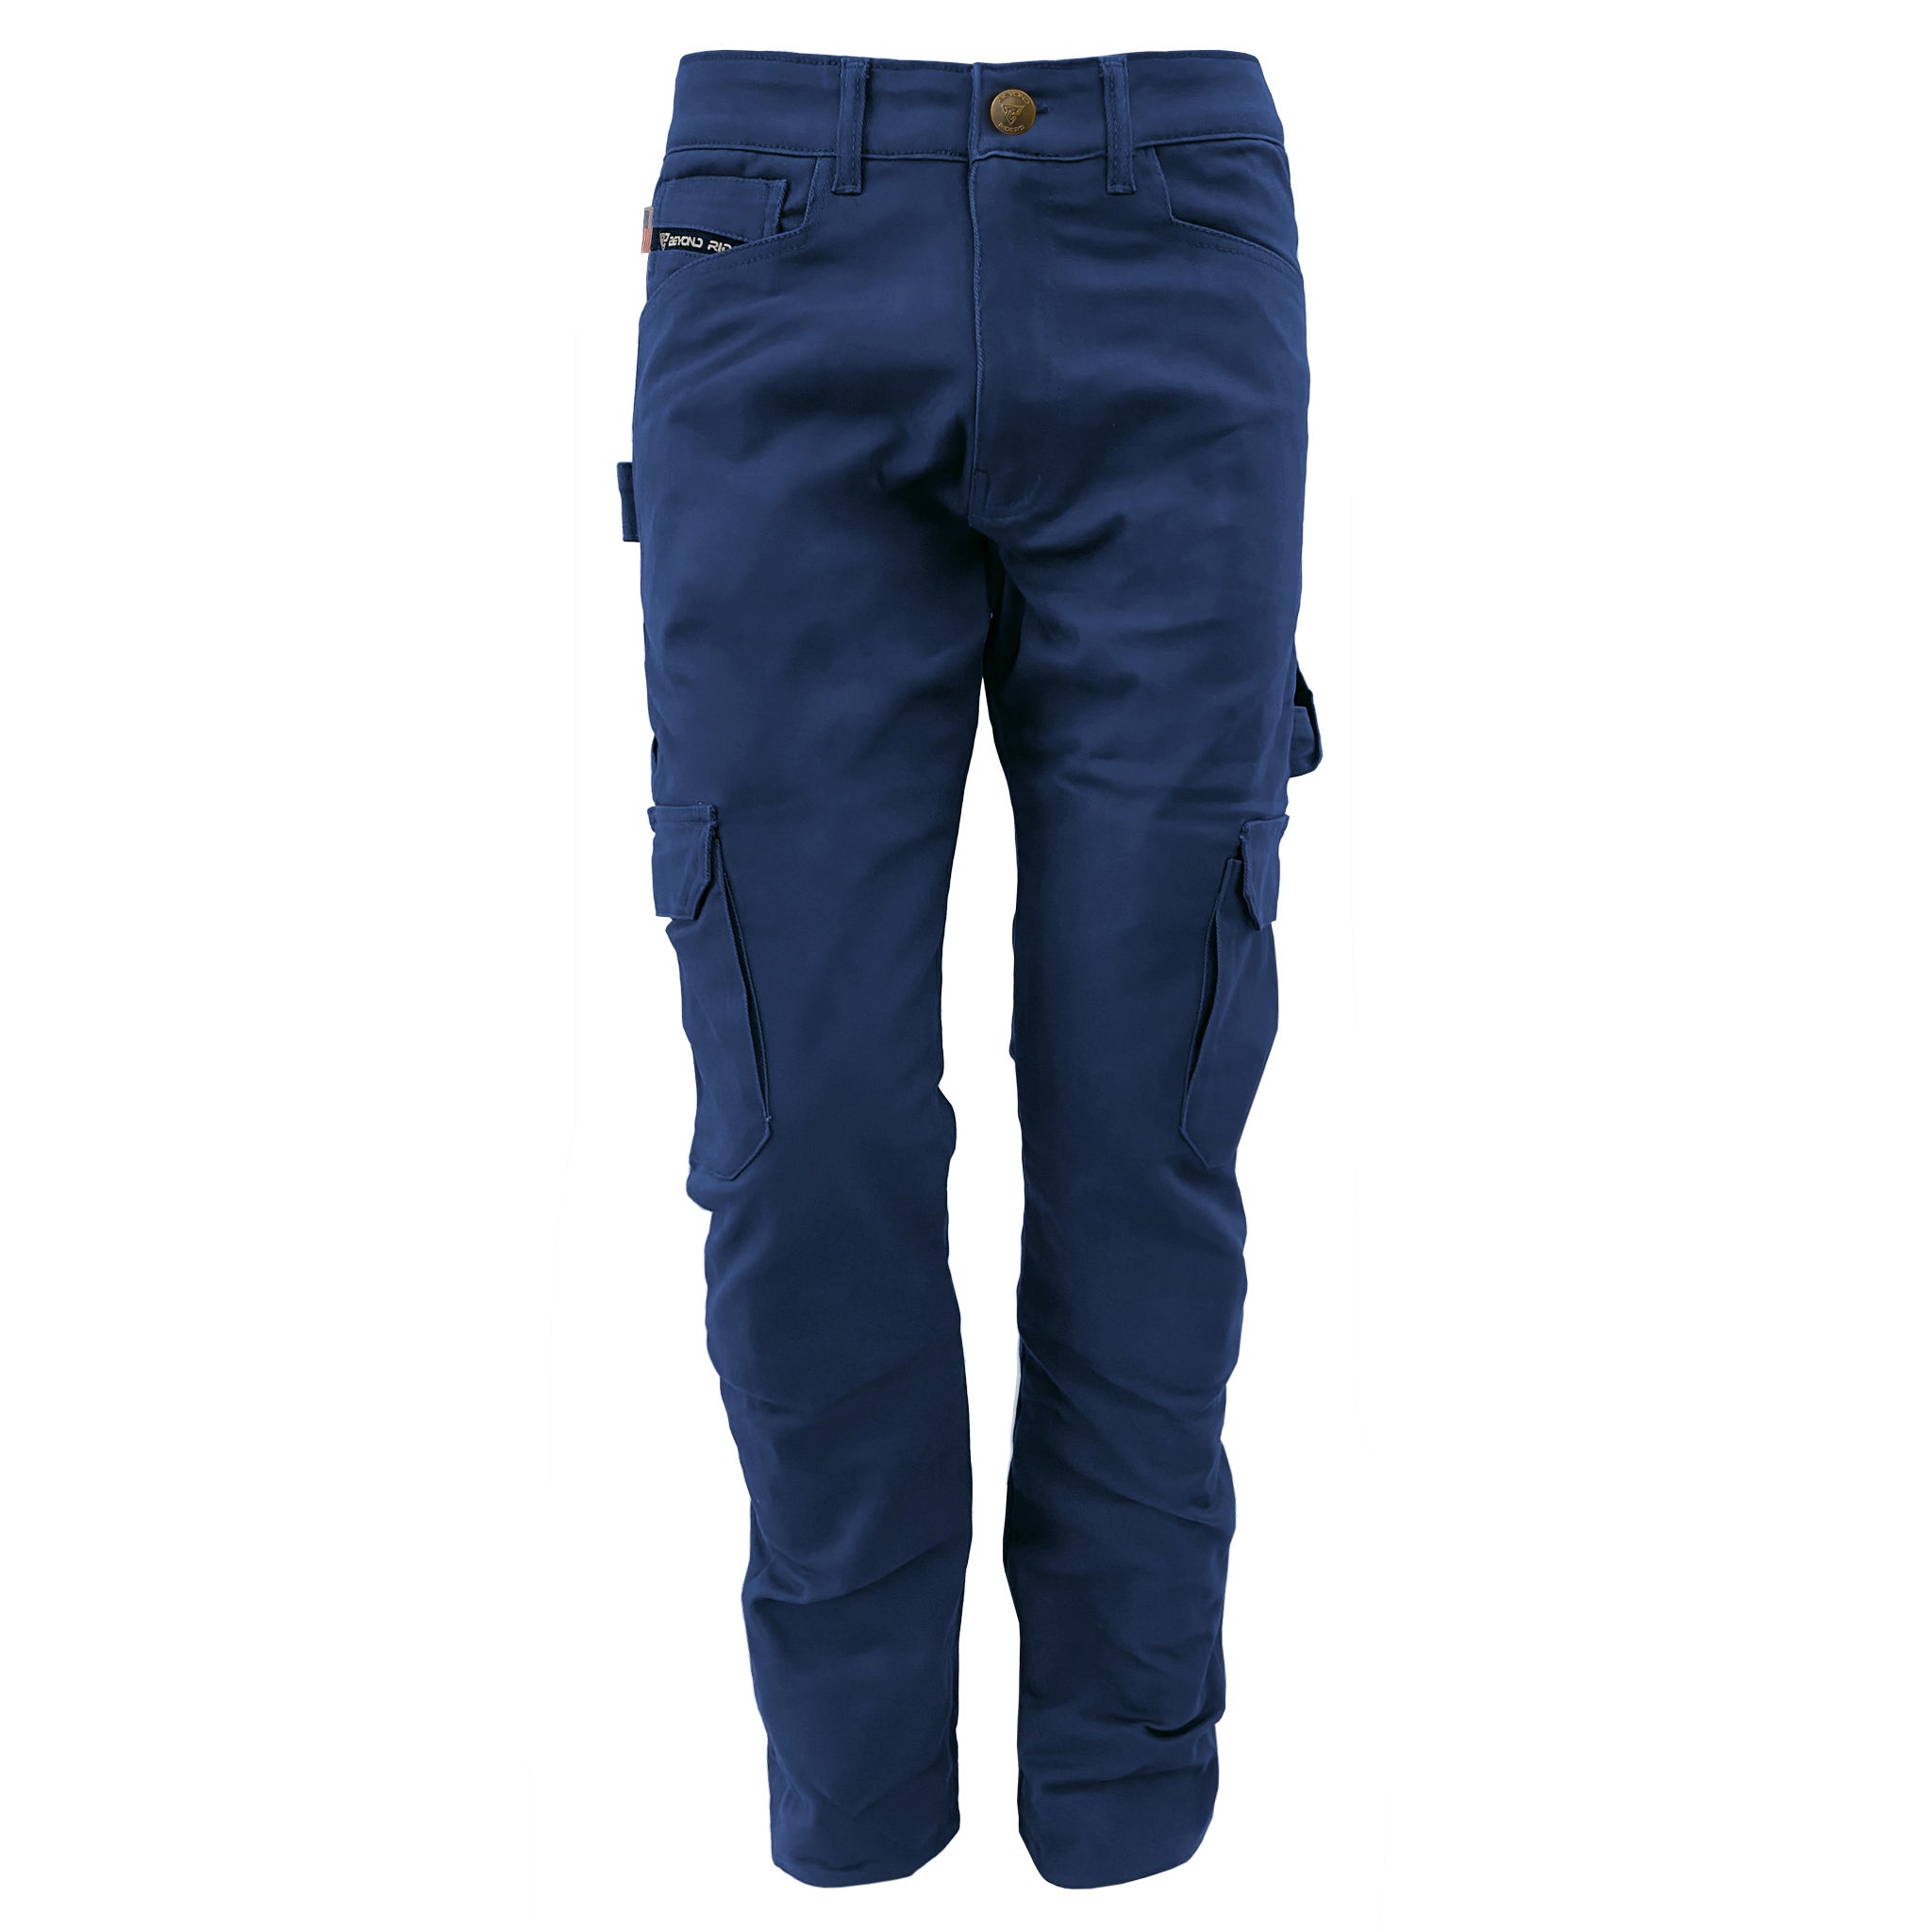 Men's-Cargo-Pants-Relaxed-Fit-Color-Navy-Blue-Front